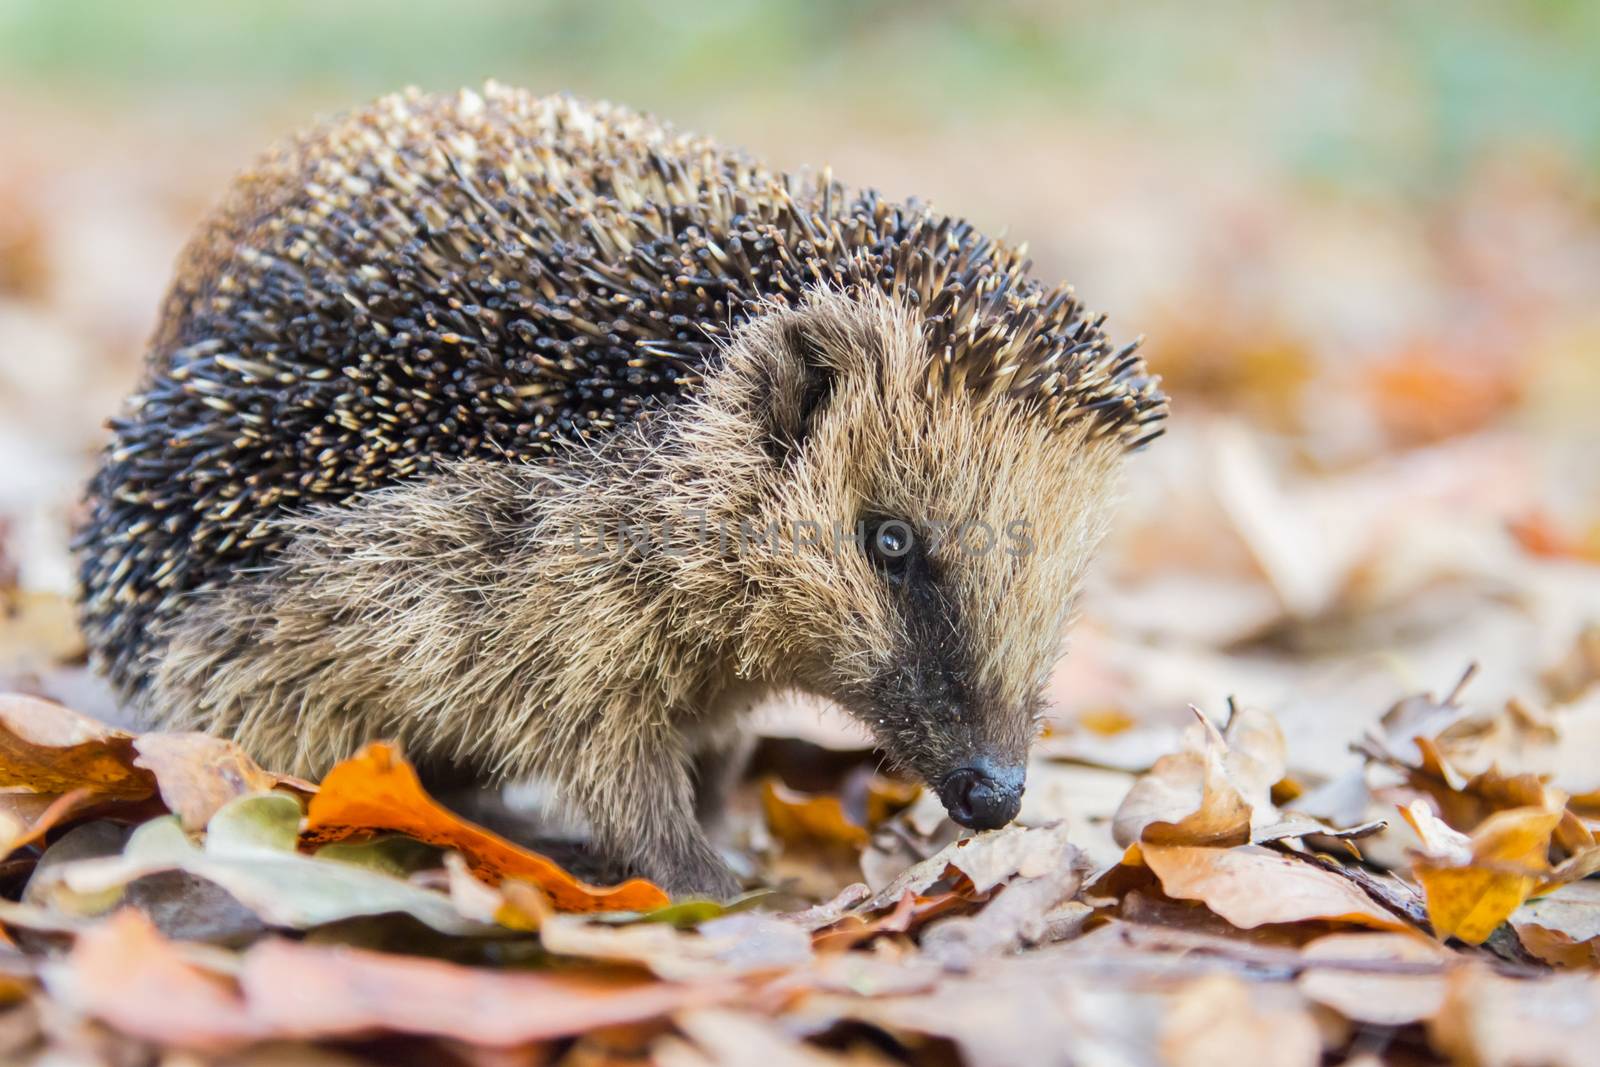 Hedgehog searching for food in brown autumn leaves